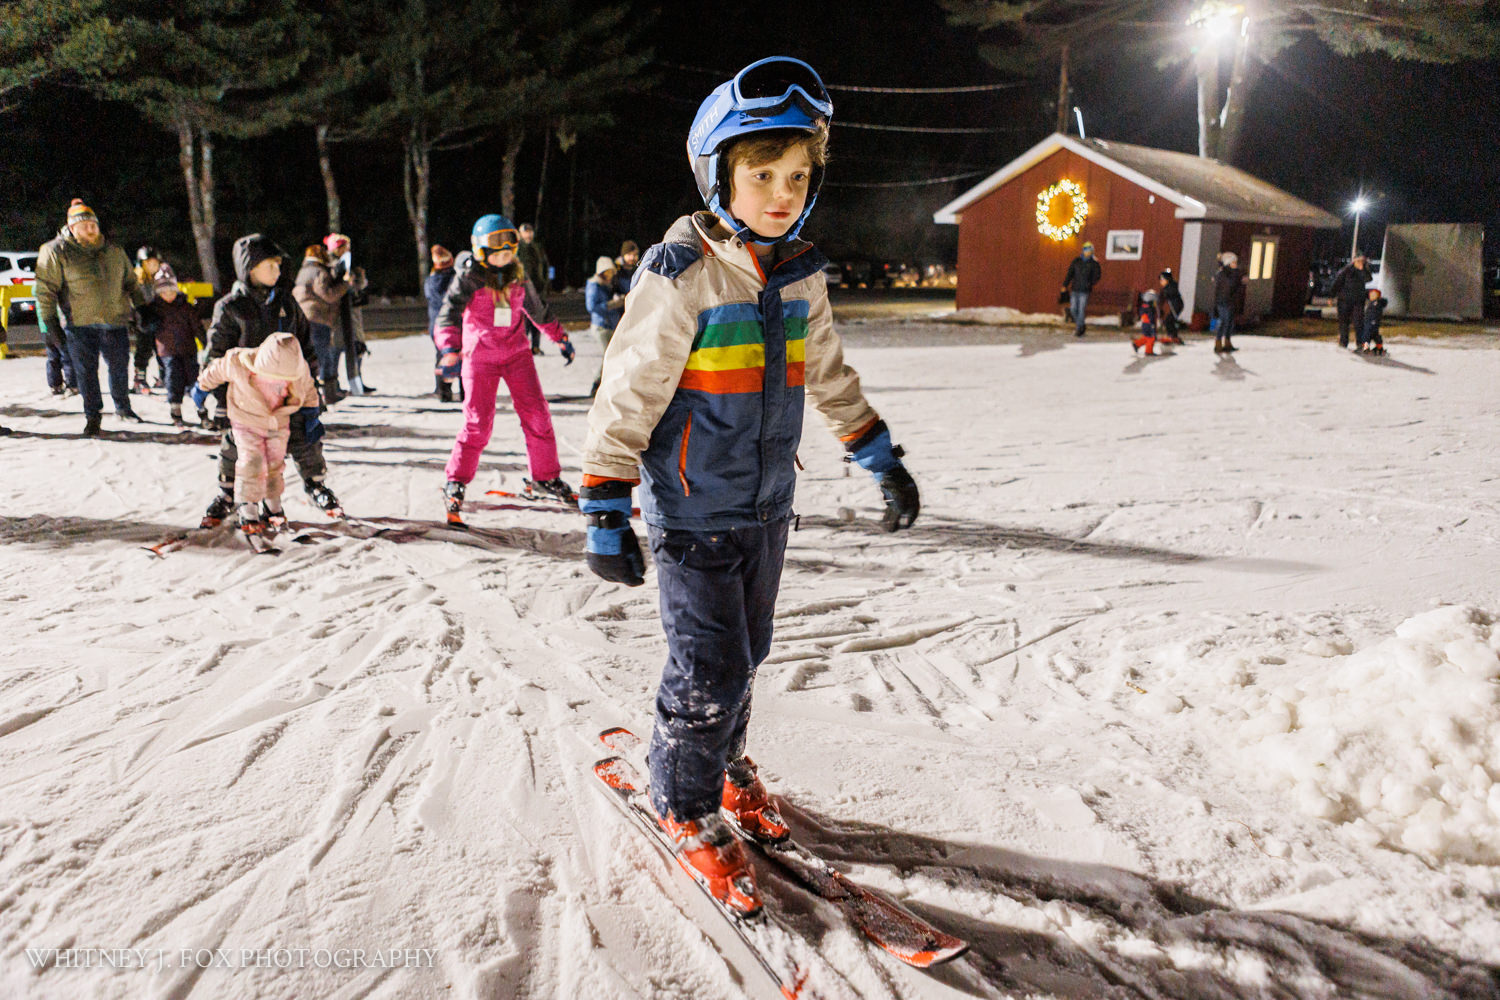 635 winter kids welcome to winter 2022 lost valley auburn maine documentary event photographer whitney j fox 3937 w